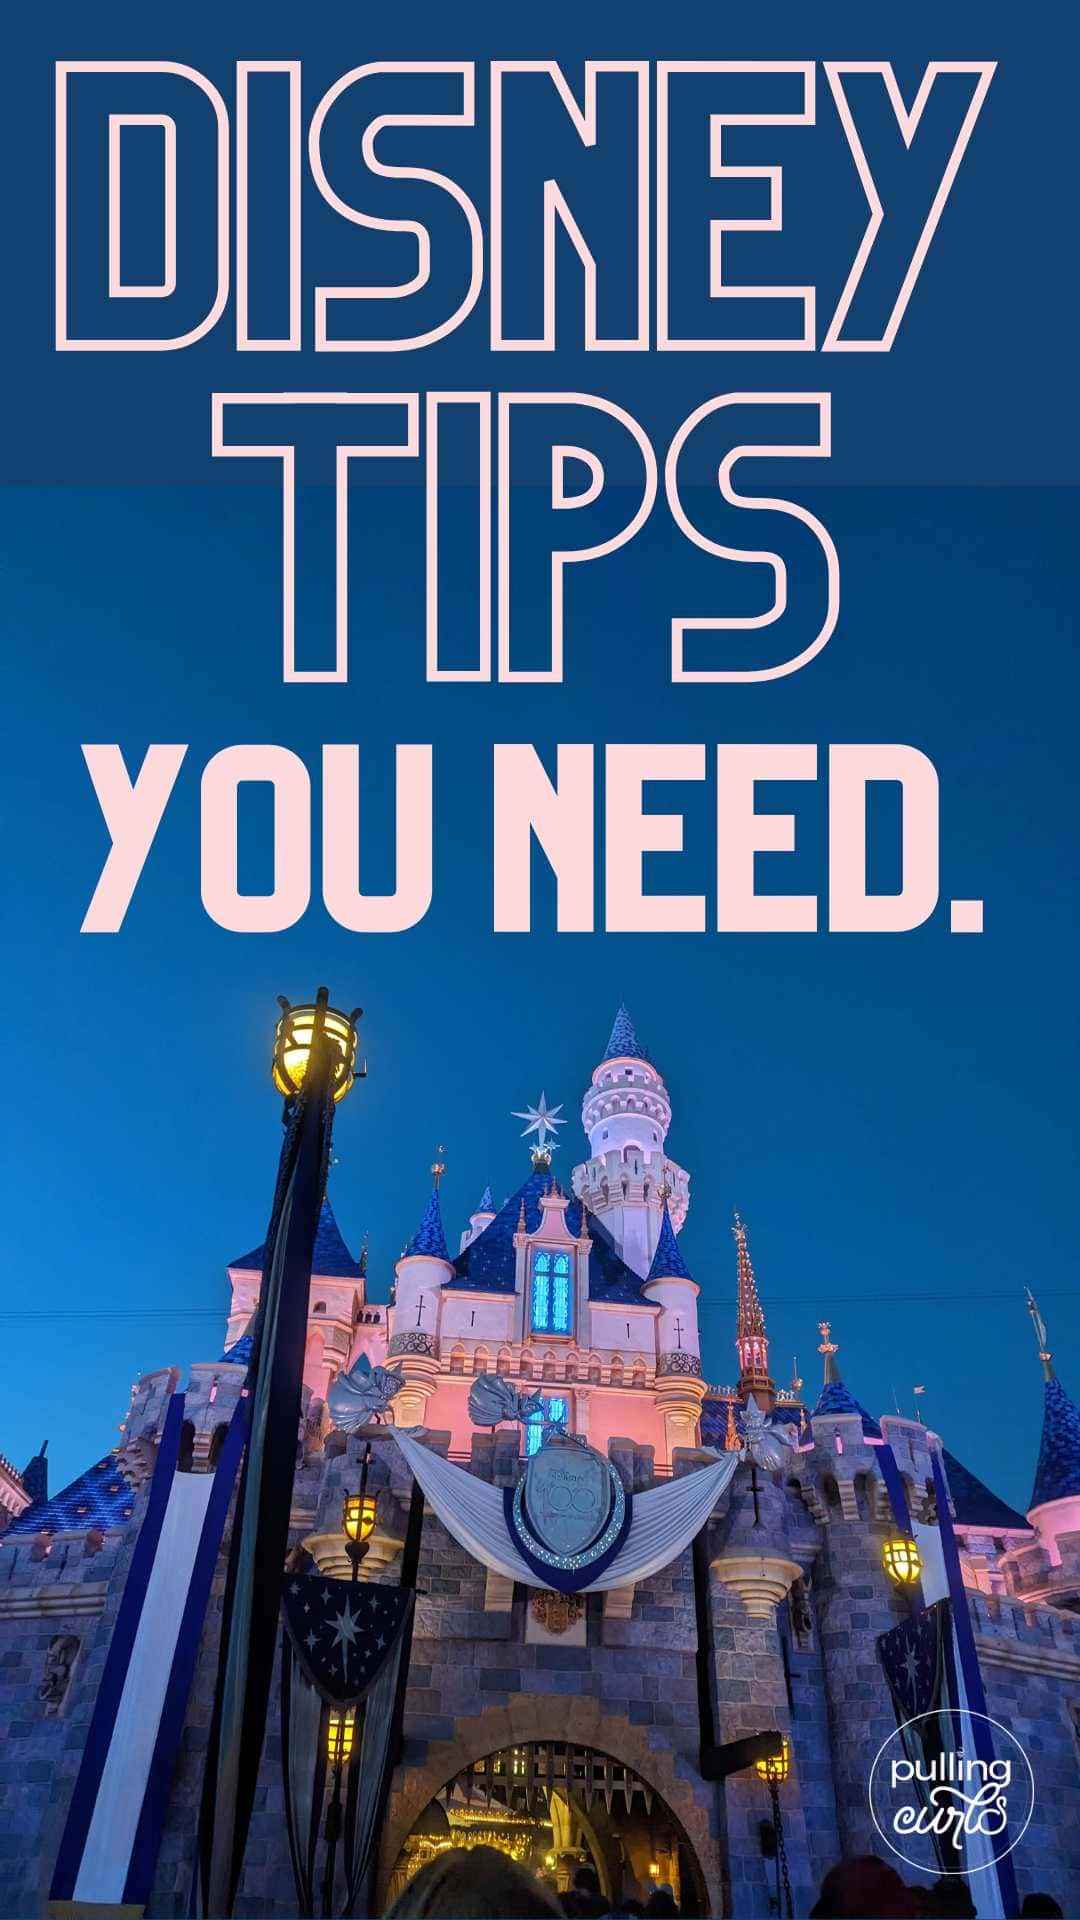 Get the best out of your Disneyland visit with these top Disney tips for families! Learn about the Genie plus and Lightning Lane systems to maximize your time at the park, especially during busy periods. Discover strategies for pre-purchasing Genie plus to access popular attractions without long waits, and find out how to prioritize rides and utilize the Lightning Lane system effectively. Listen in as Disney experts discuss the benefits of pre-planning, mealtime tips via @pullingcurls